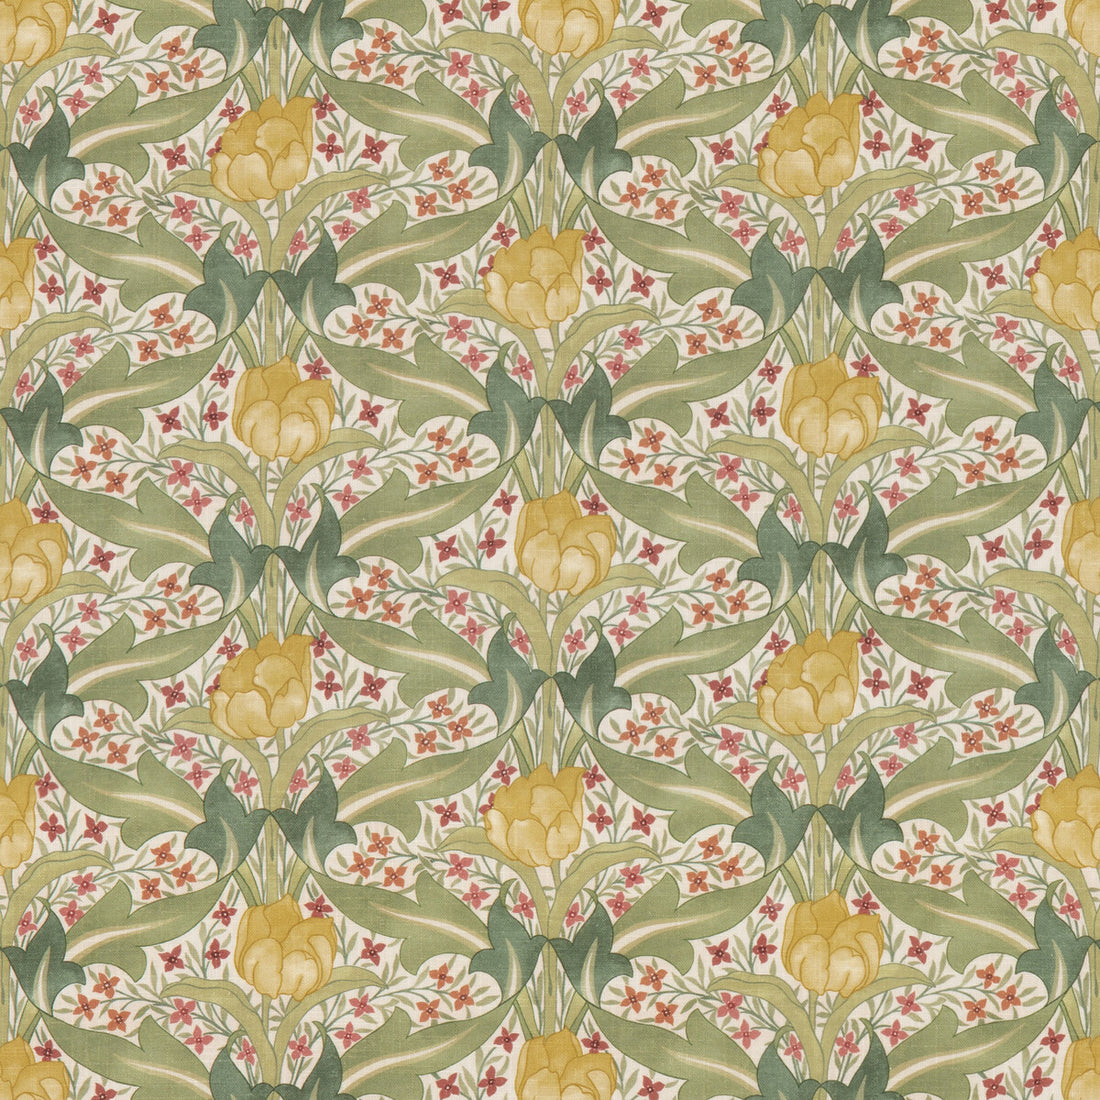 Tulip &amp; Jasmine fabric in red/green color - pattern BP10994.1.0 - by G P &amp; J Baker in the Original Brantwood Fabric collection